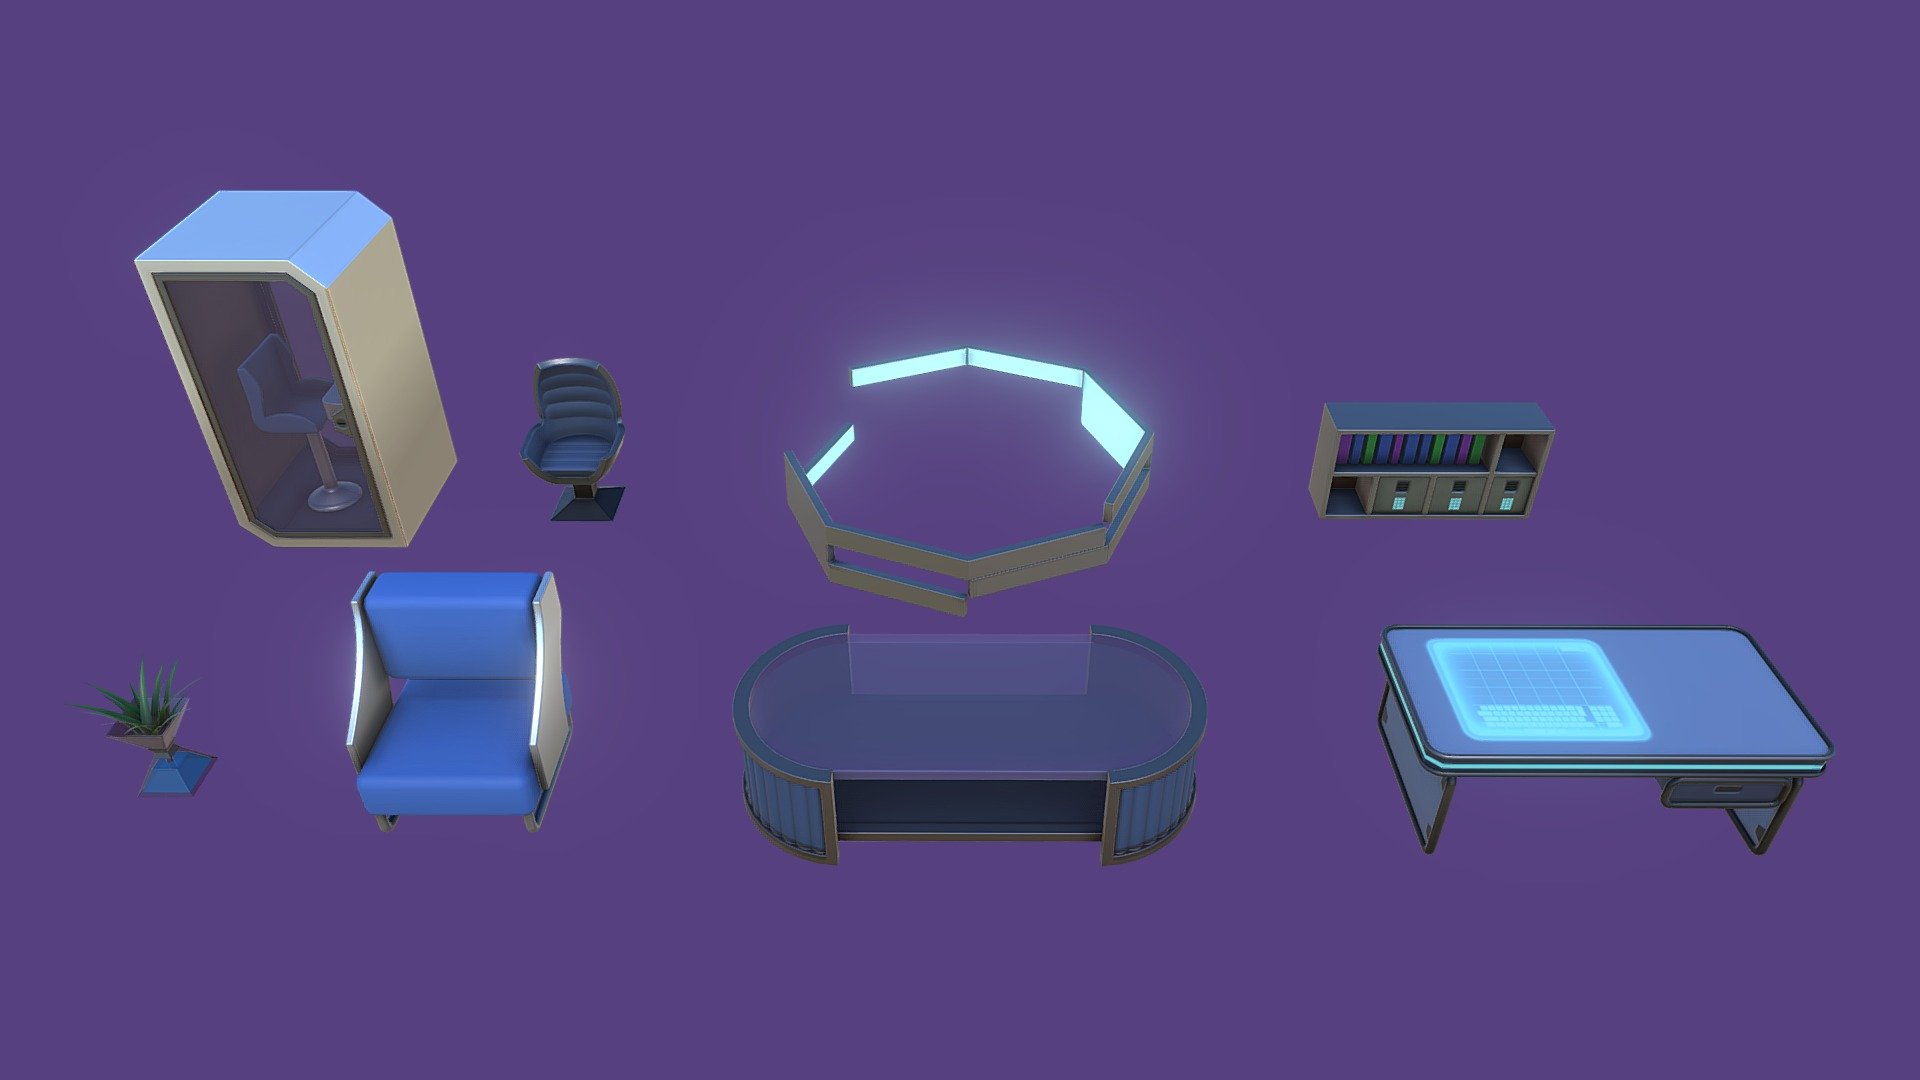 Futuristic Workspace asset pack [MERGED TEXTURE SET of 4096 x 4096 ]

Demo scene with indvidual assets and texture sets here: https://skfb.ly/oDGyB

This pack includes:




Armchair

Silent Cabin

Coffee Table

Holo-Desk

Modern Lamp

Plantpot

Shelf

Workchair

The Demo Scene

8 assets sharing a single texture set of 7 textures at 4k resolution 3d model